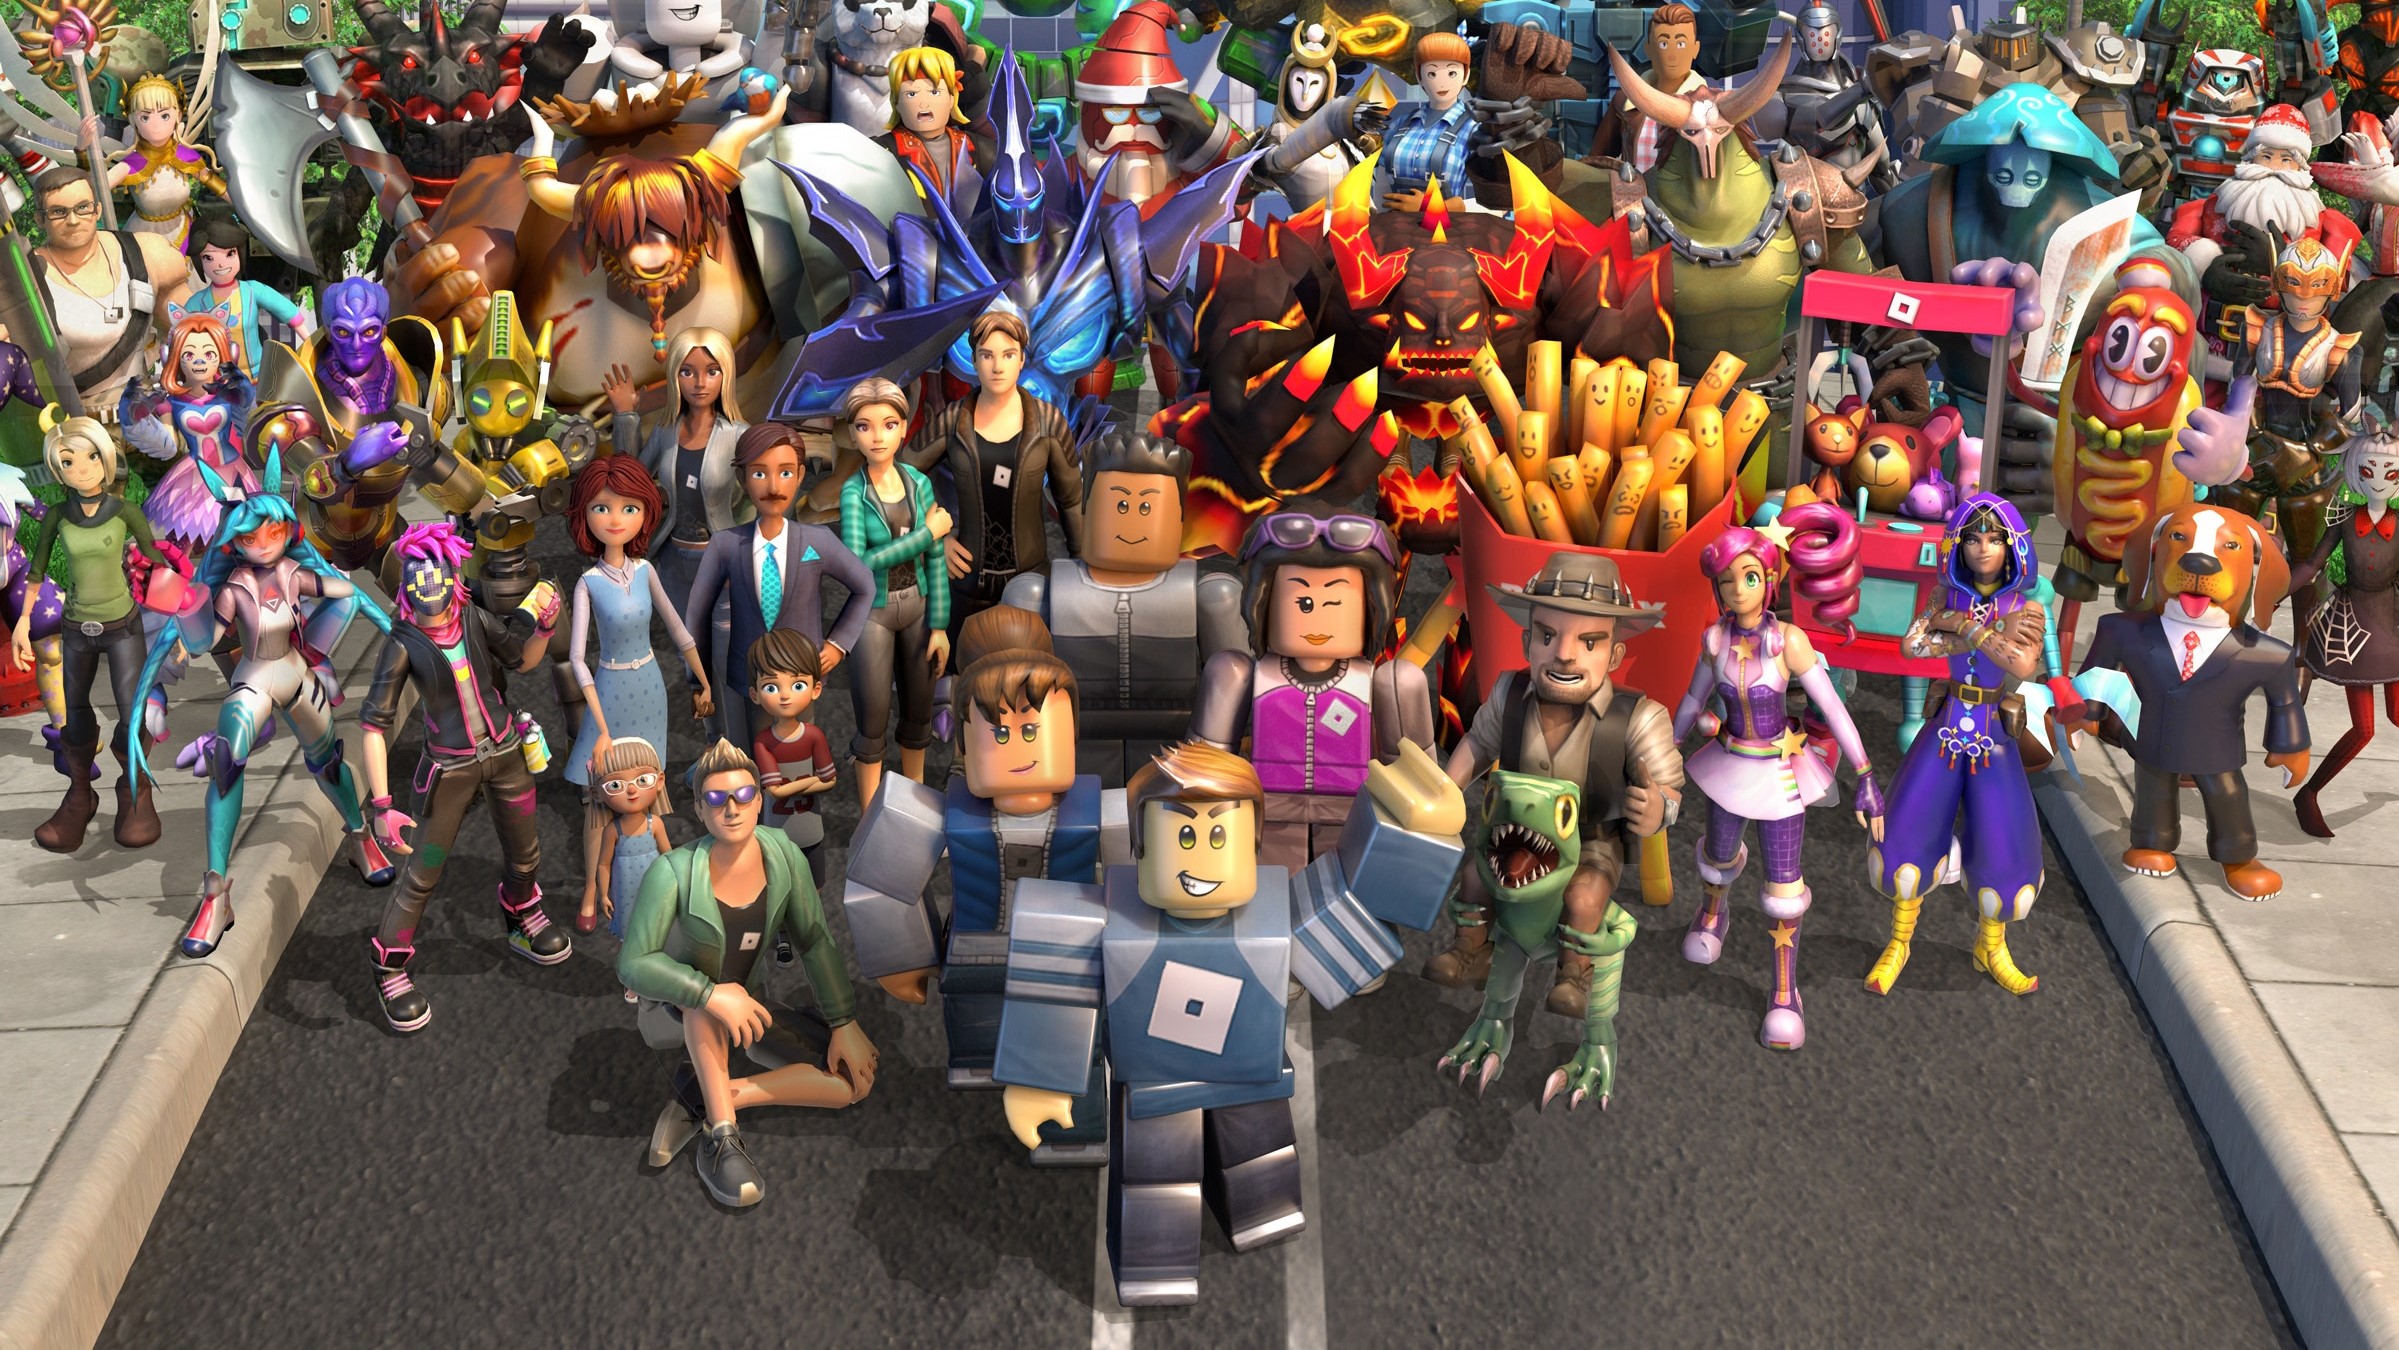  Advertising watchdog slams Roblox because of paid-for influencers shilling Robux without disclosure 'children can understand' 